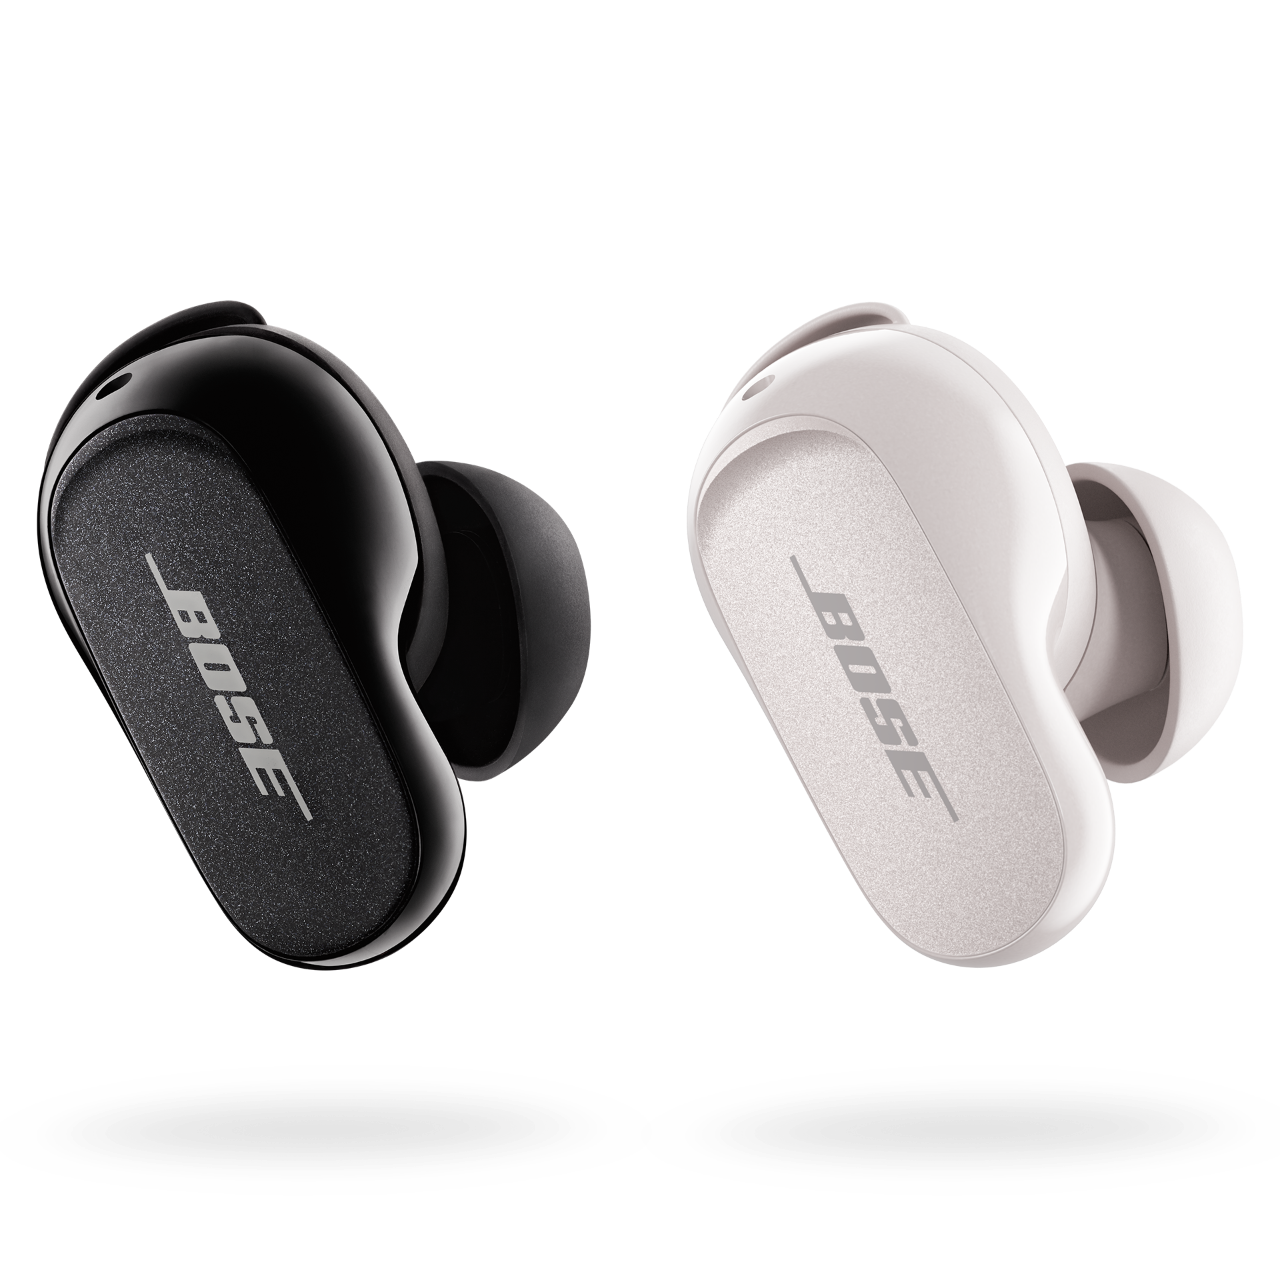 Bose reduces size and amps up noise canceling for the $299